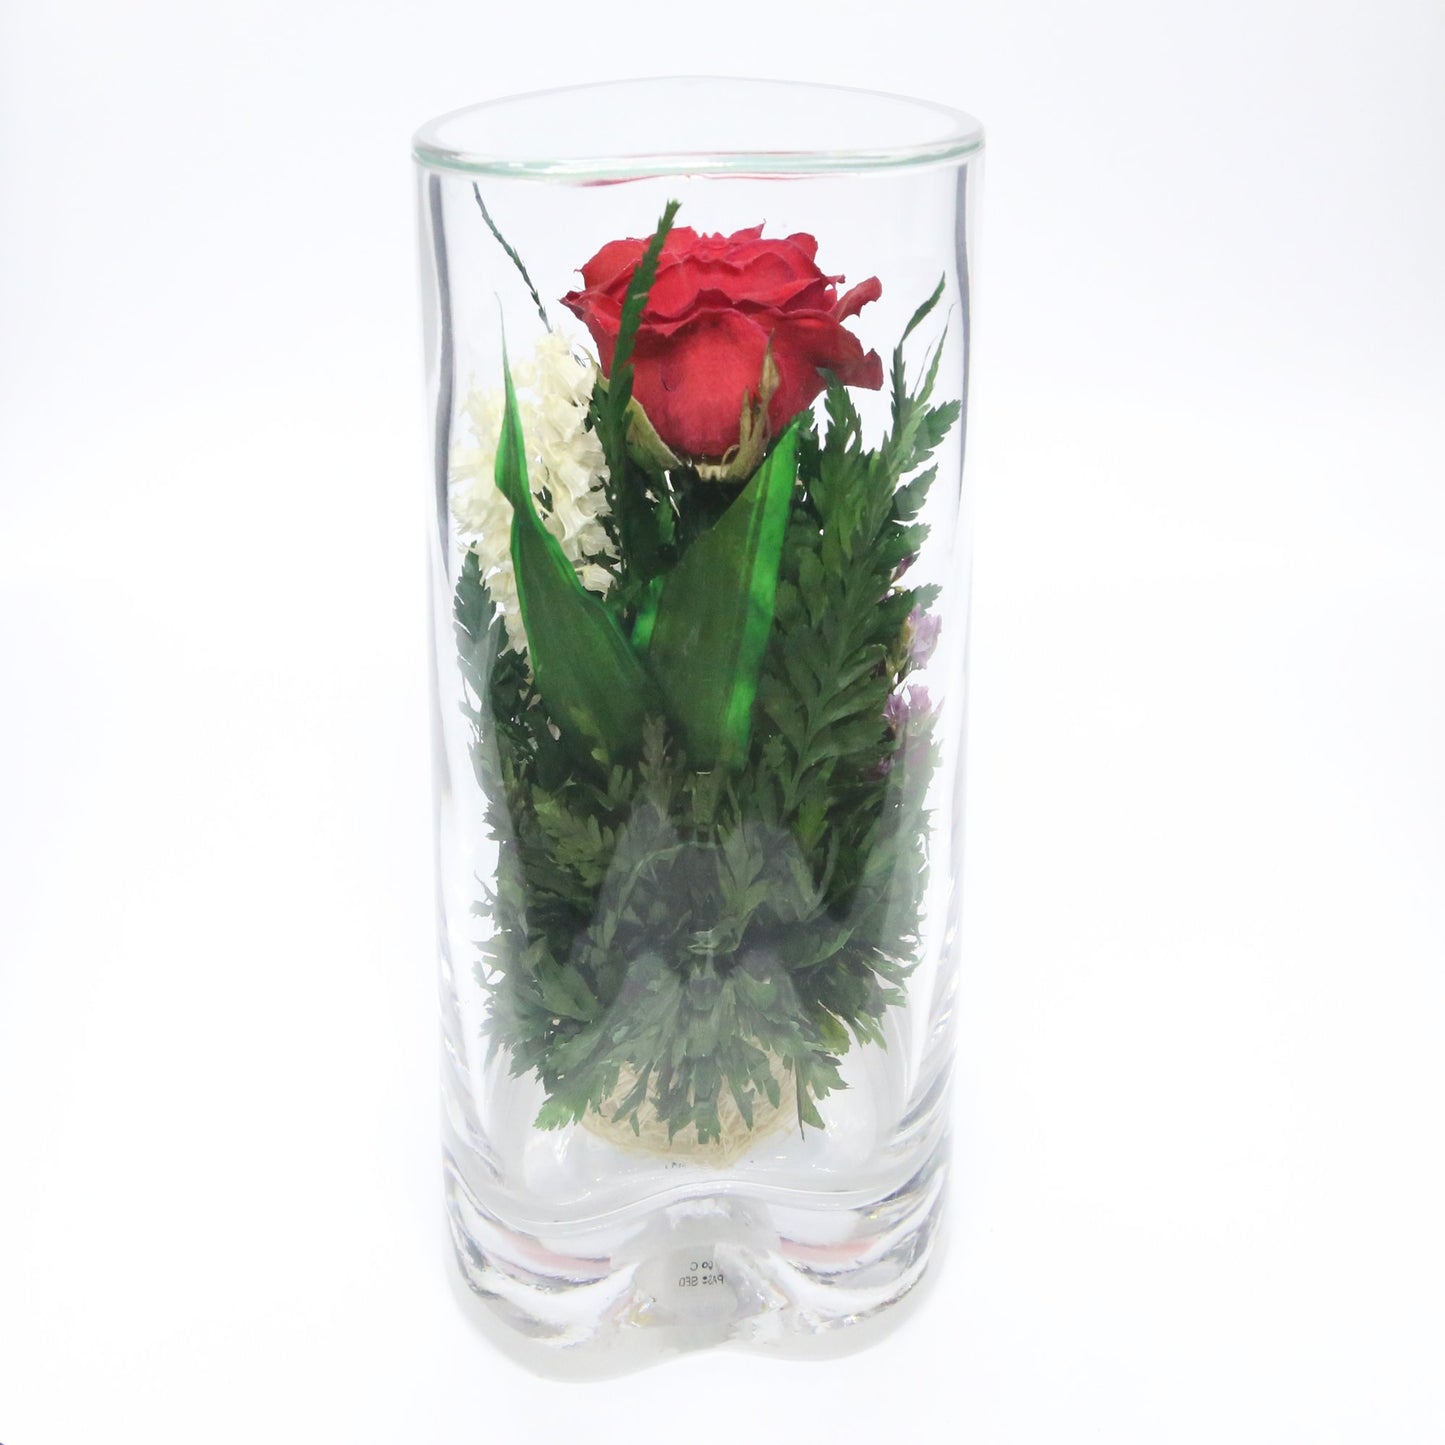 52576 Long-Lasting Red Rose with White Limoniums and Greenery in a Heart-Shaped Vase - FIORA FLOWER